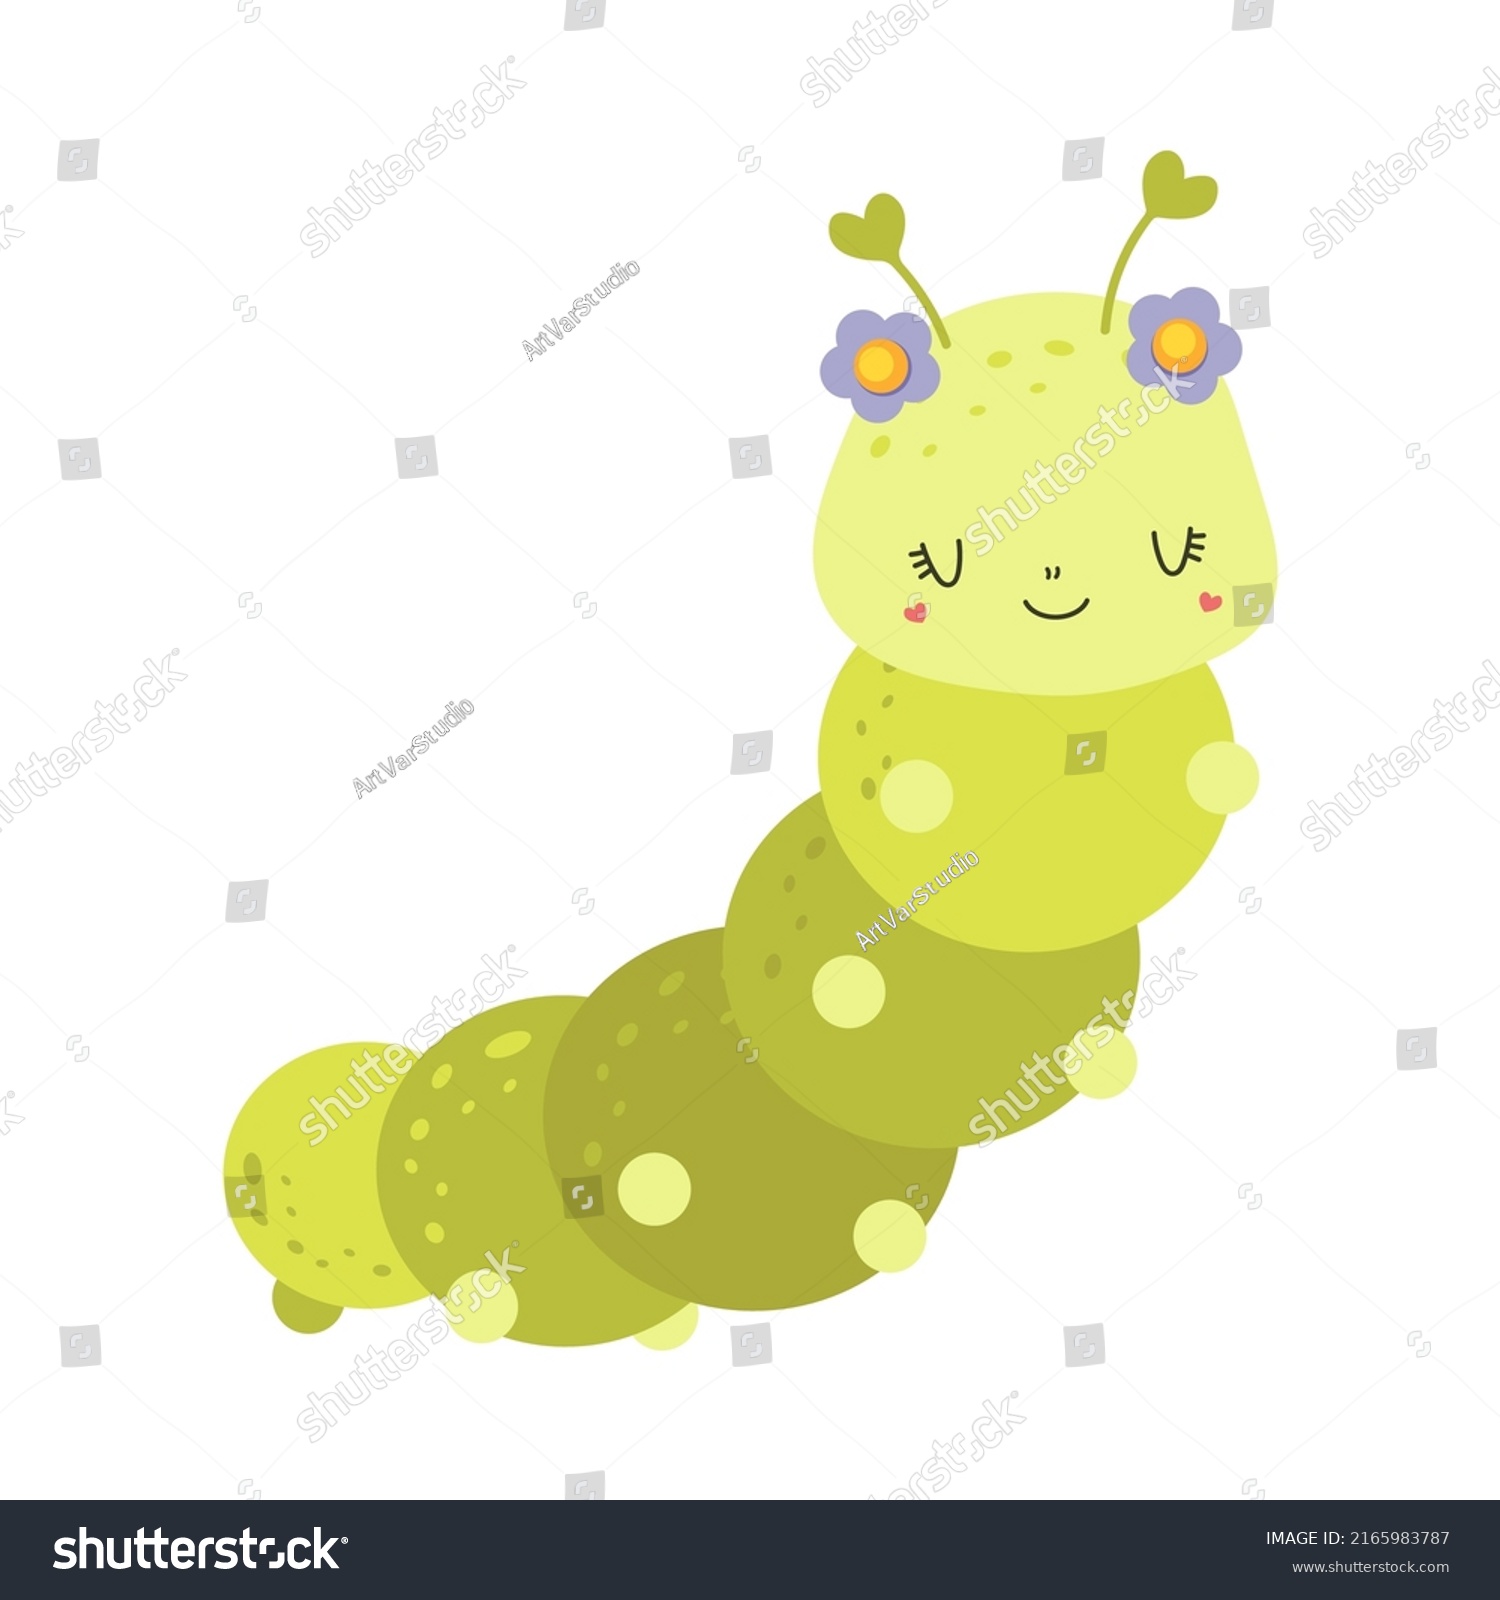 SVG of Clipart Caterpillar in Cartoon Style. Cute Clip Art Caterpillar with Flowers. Vector Illustration of an Animal for Stickers, Baby Shower Invitation, Prints for Clothes, Textile.  svg